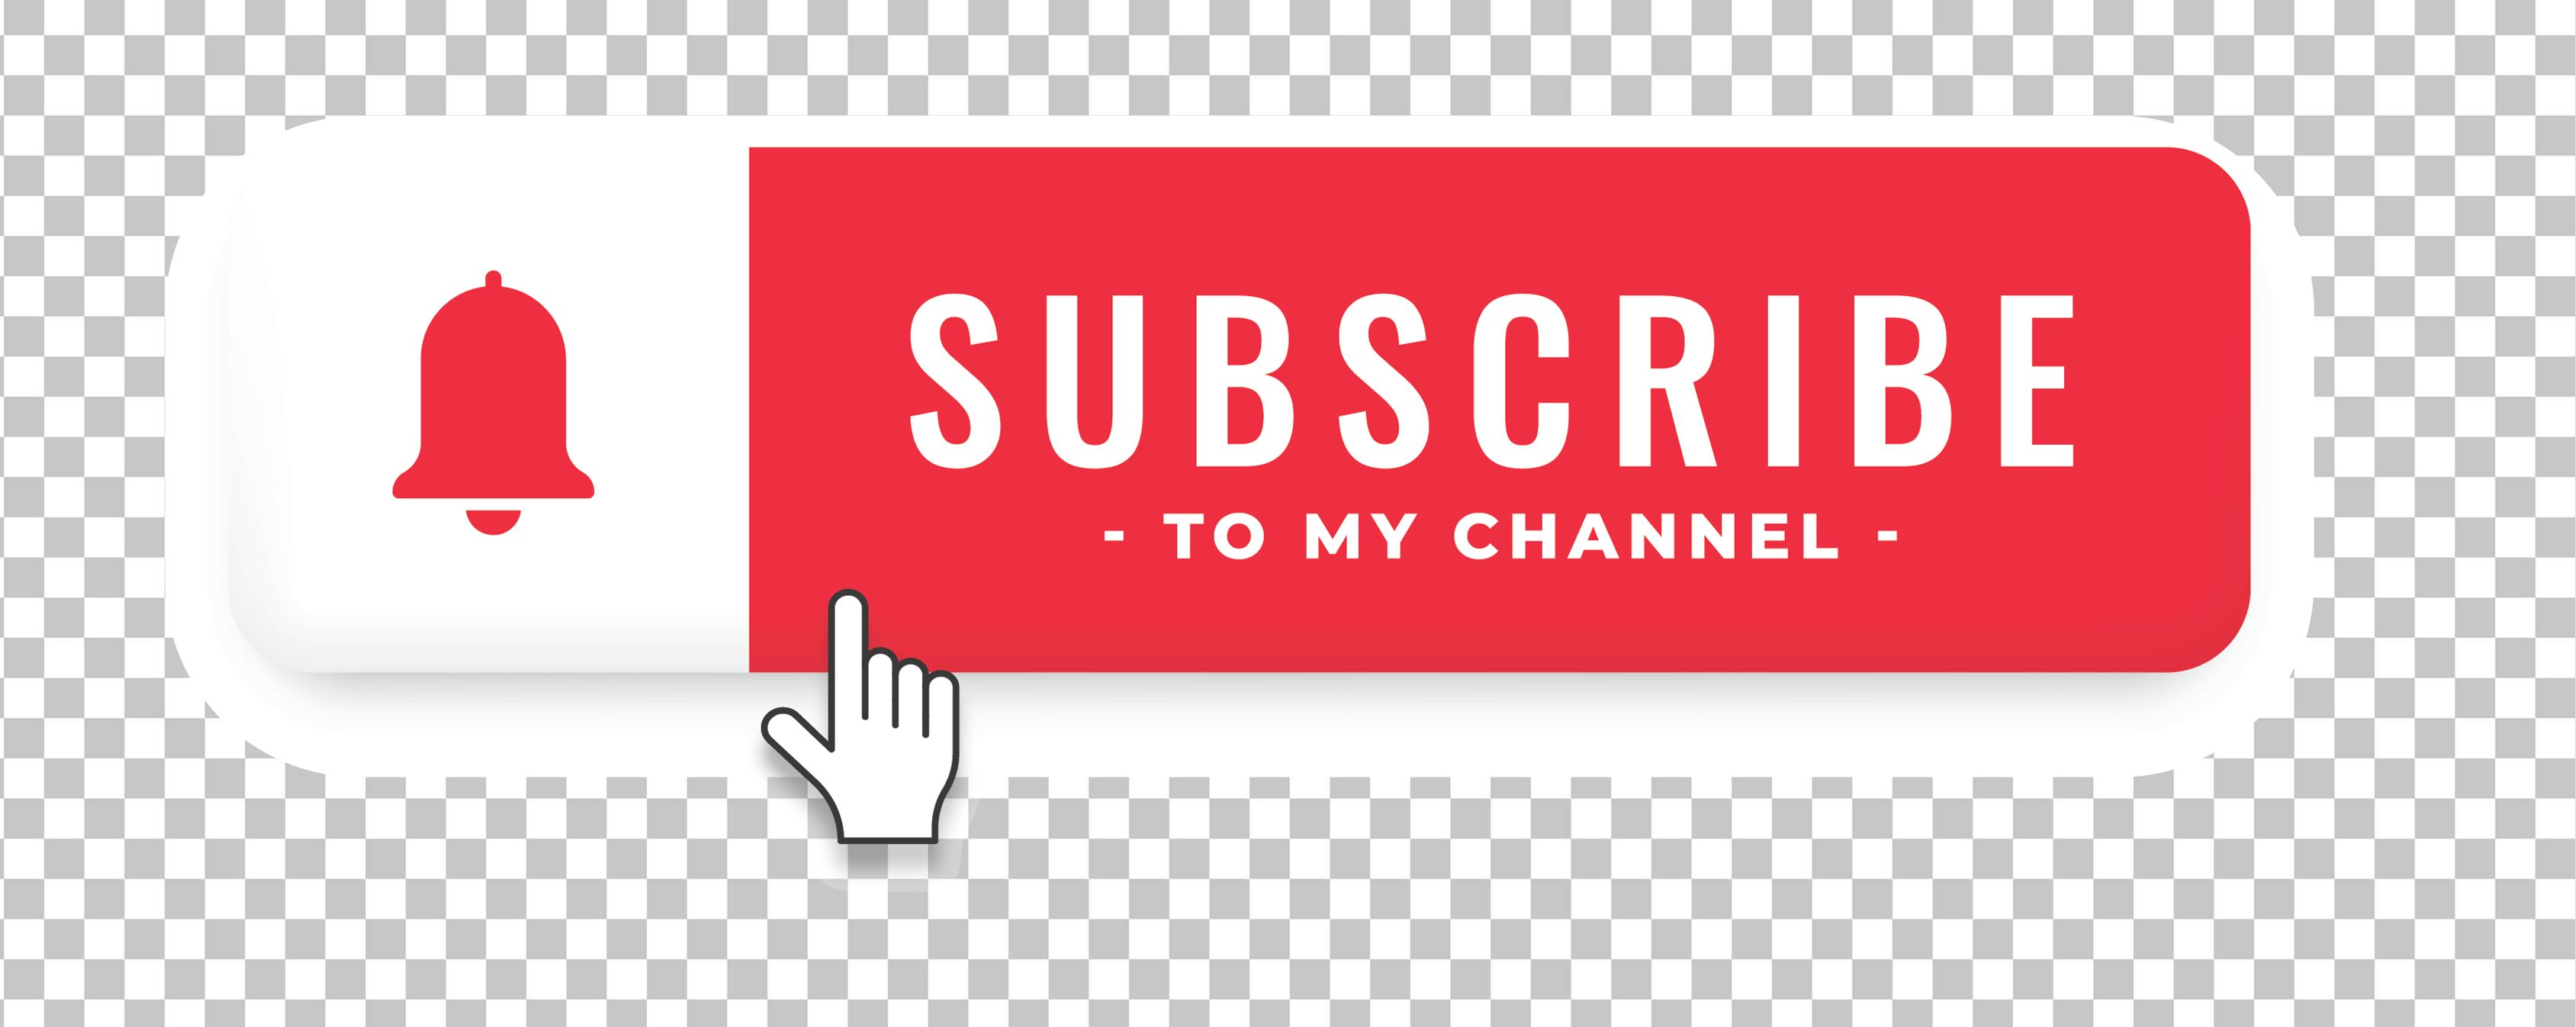 Subscribe to My Channel button transparent background image.